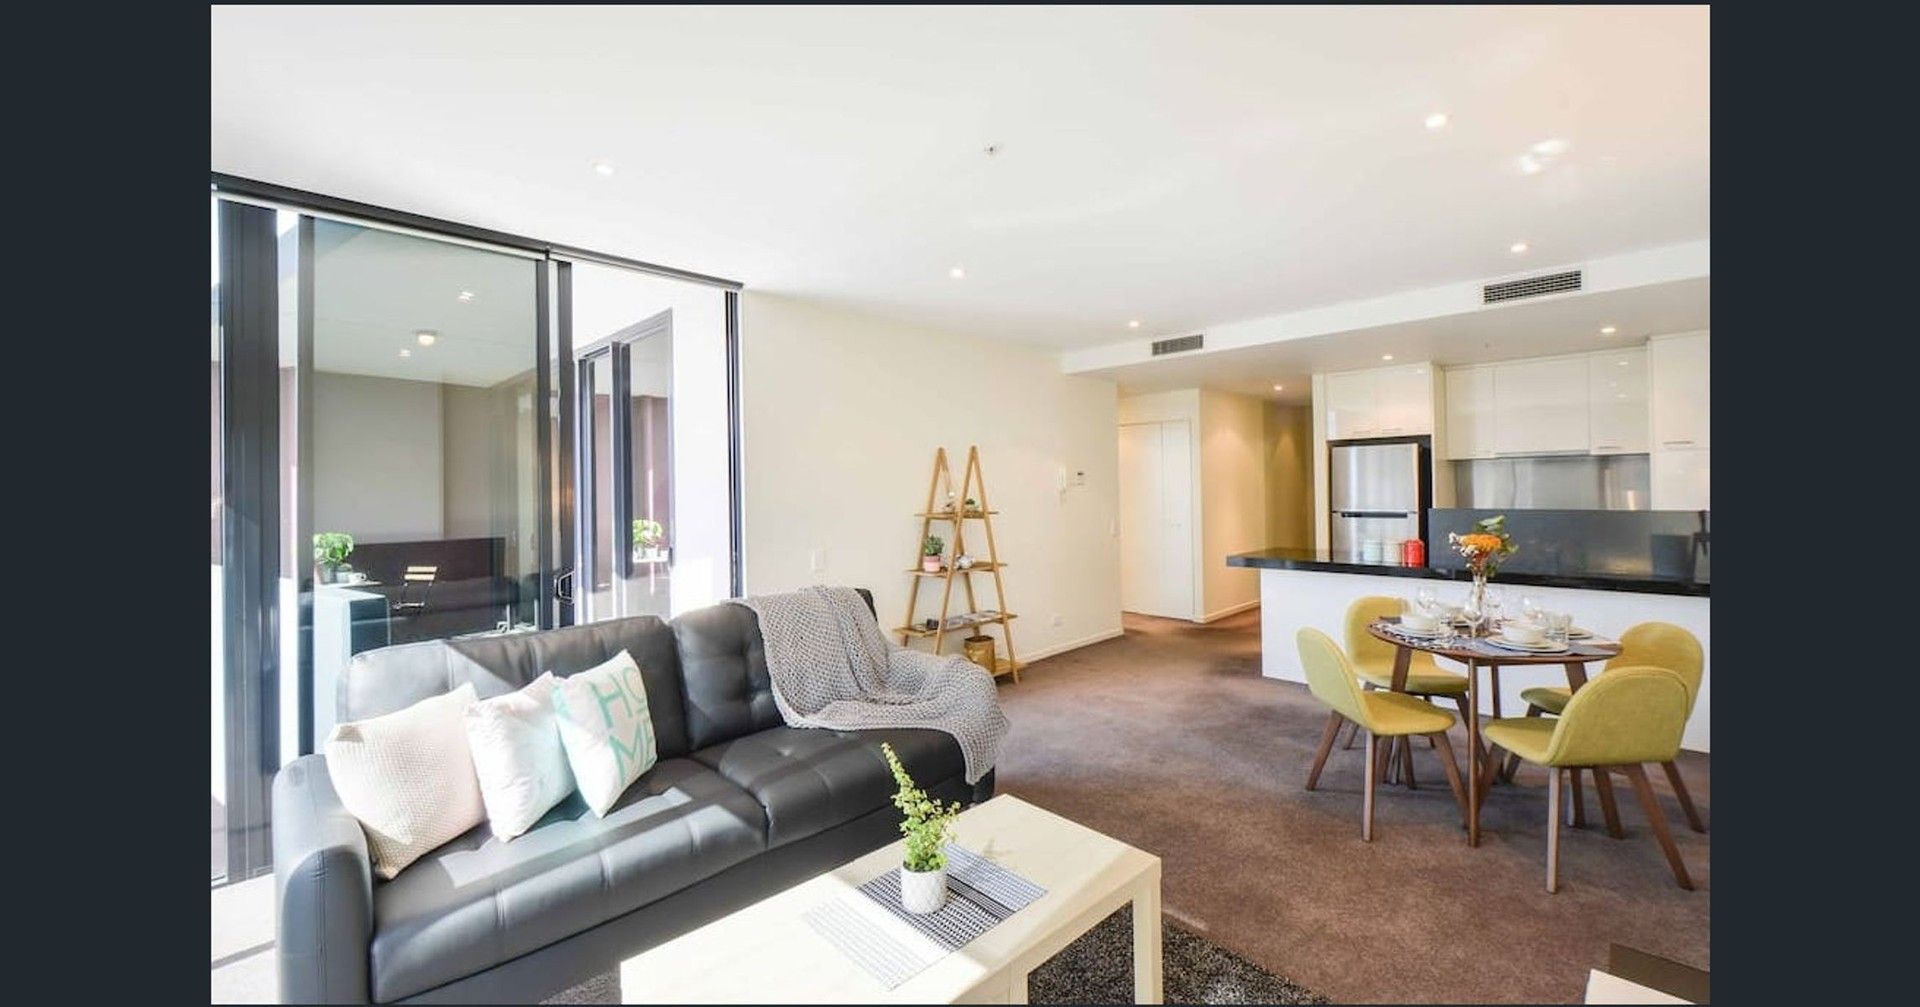 2 bedrooms Apartment / Unit / Flat in 1605/39 Caravel Lane DOCKLANDS VIC, 3008